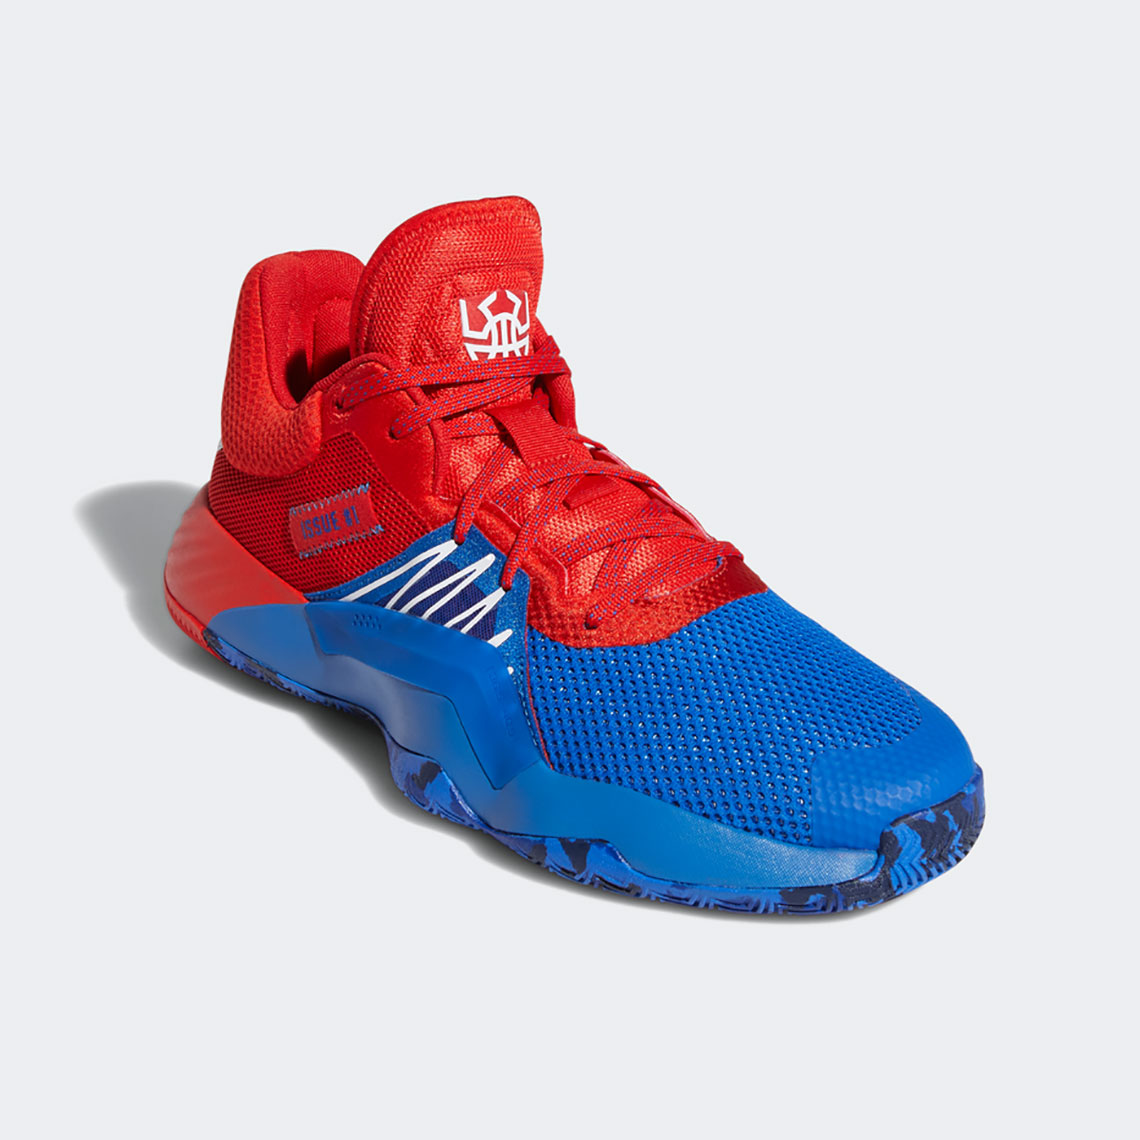 adidas spider shoes